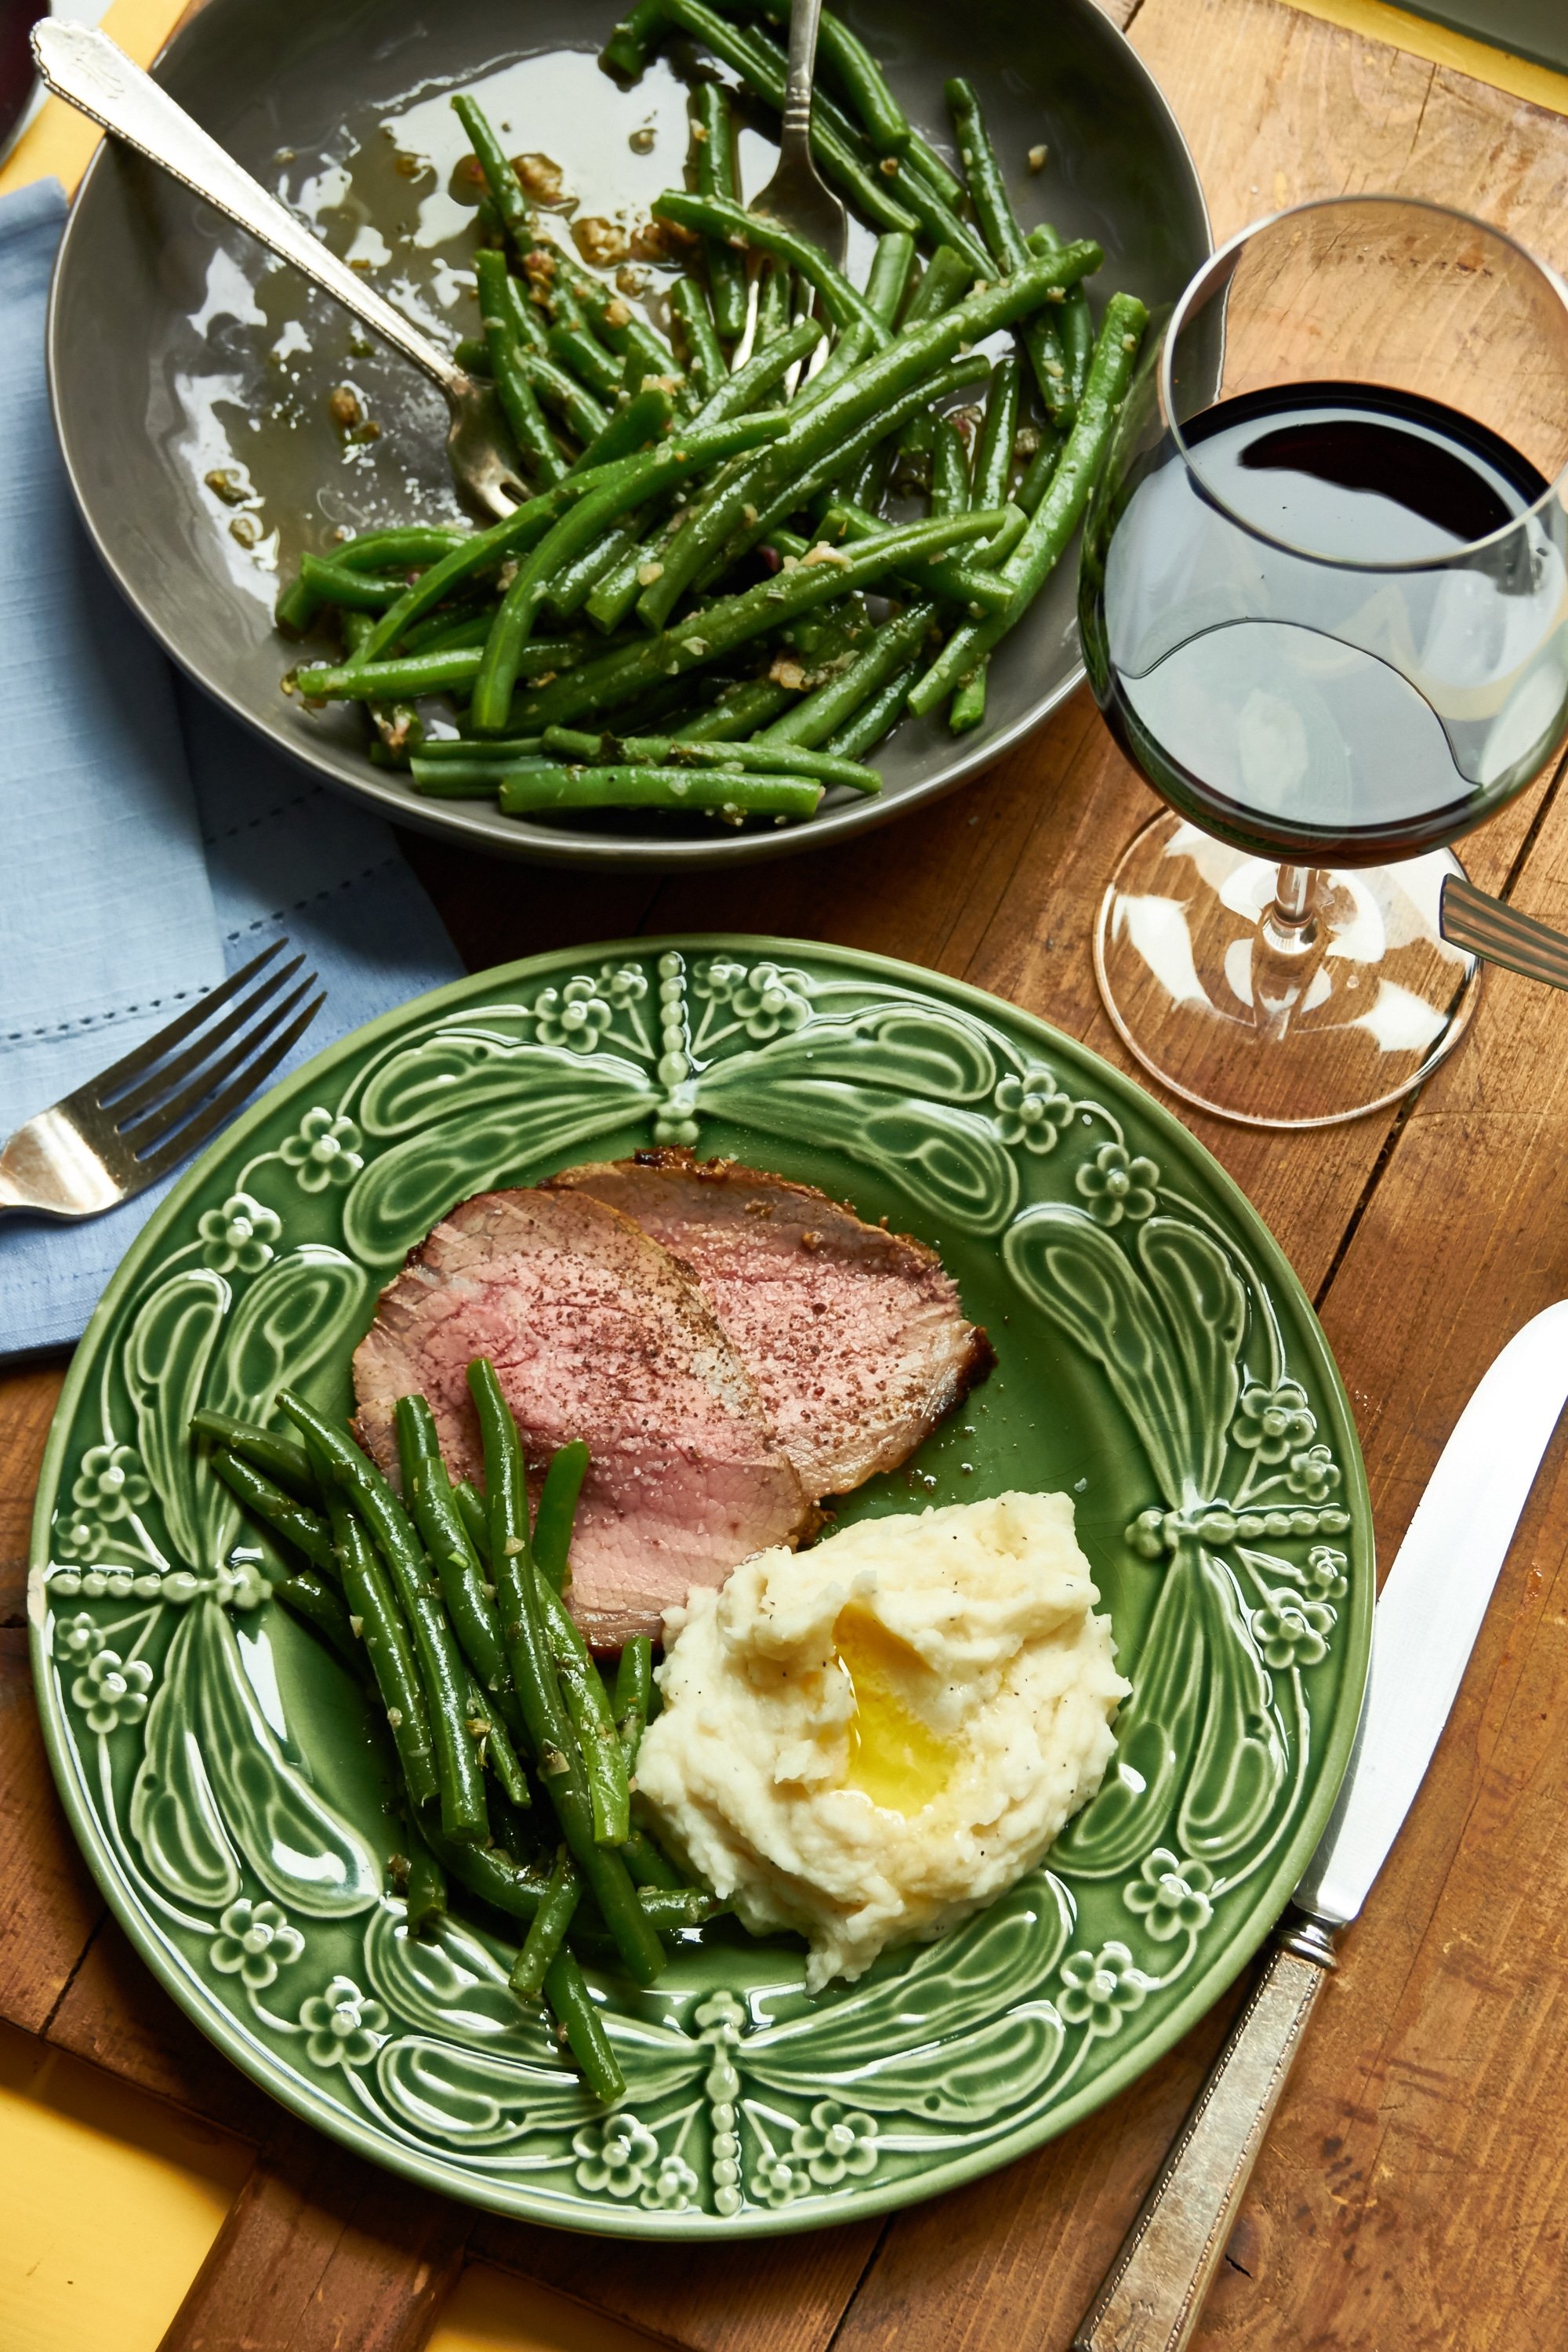 Roast Beef with Mustard Garlic Crust, green beans, and mashed potatoes on a plate.